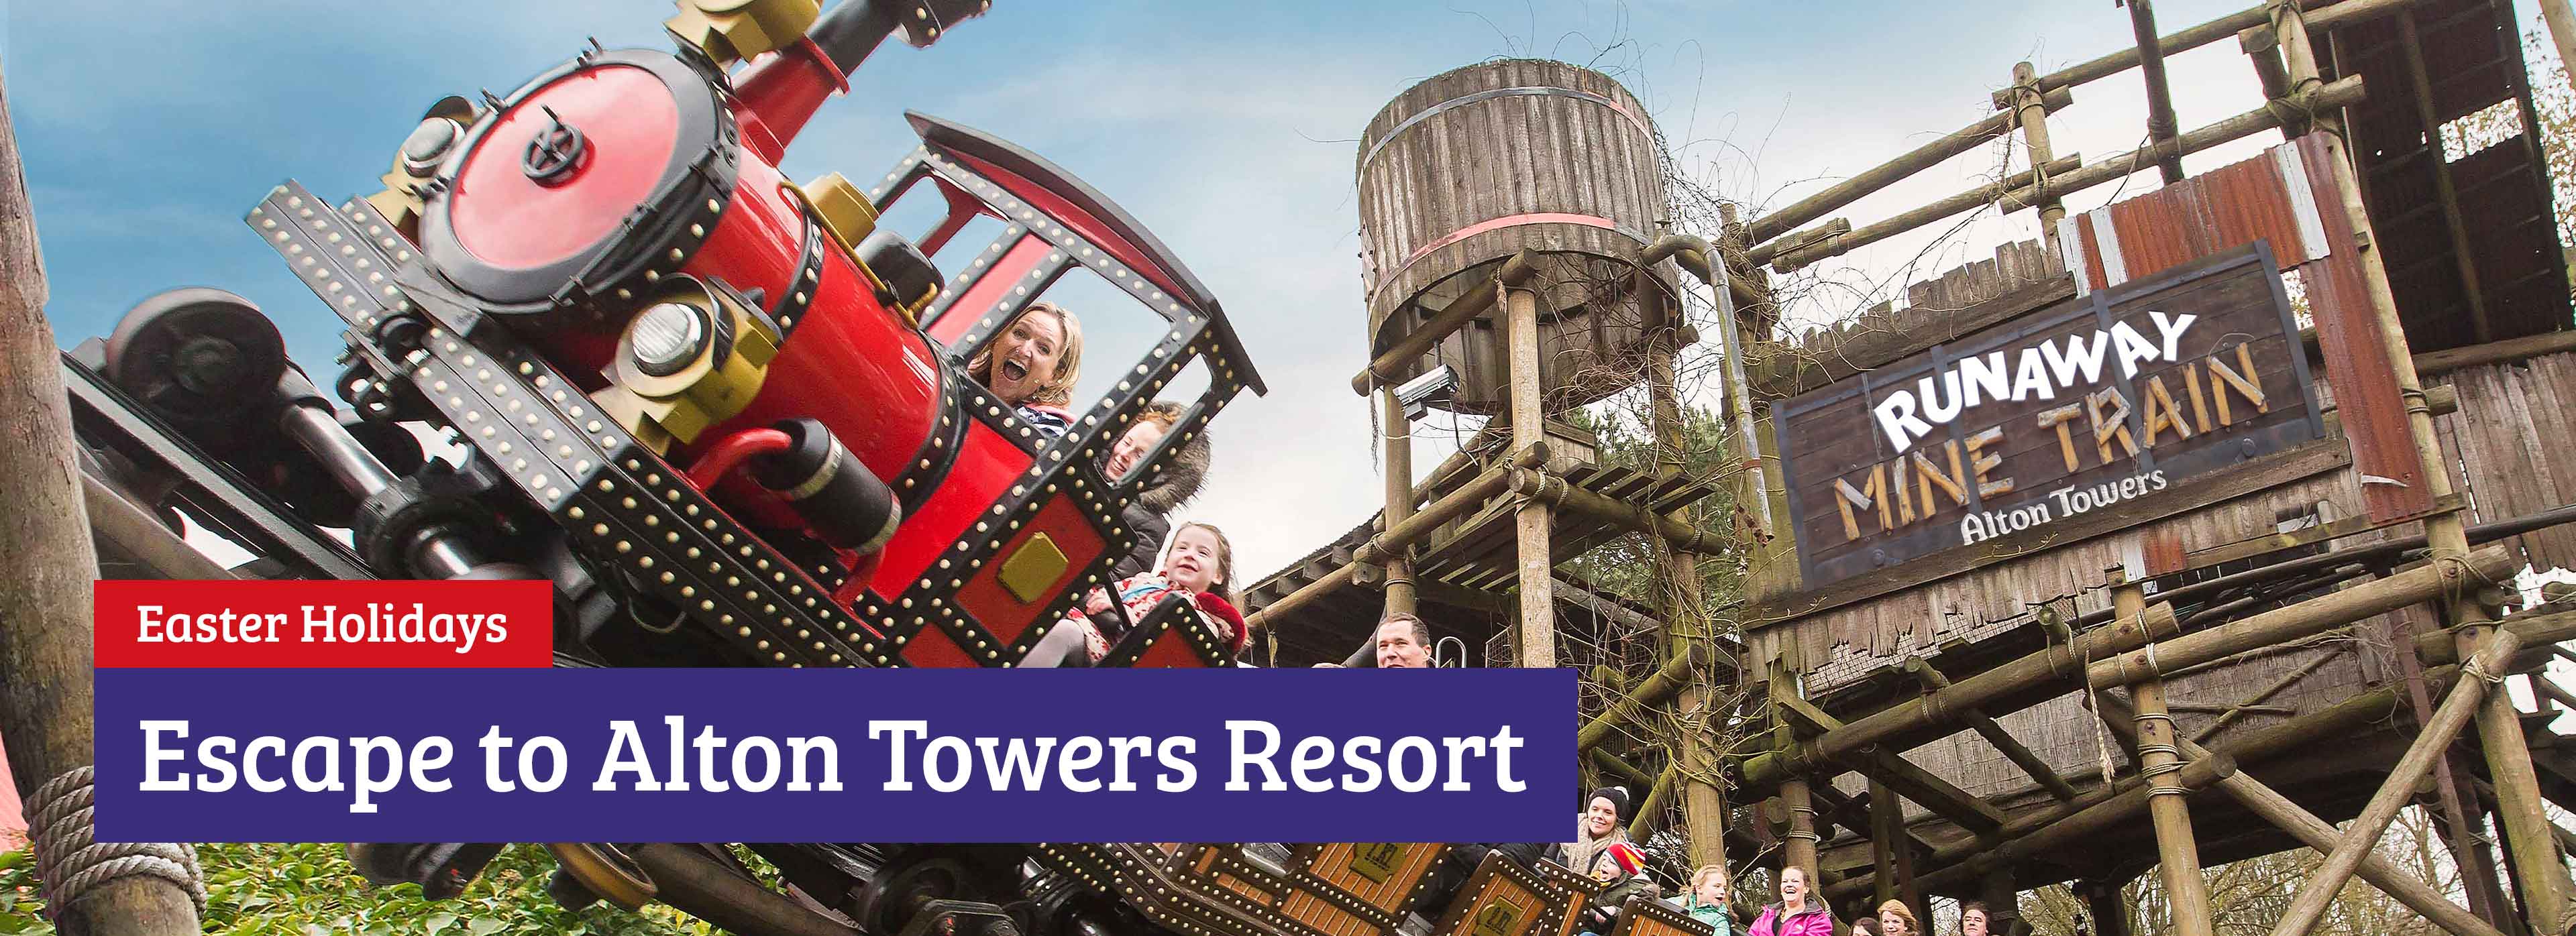 Easter Breaks at the Alton Towers Resort